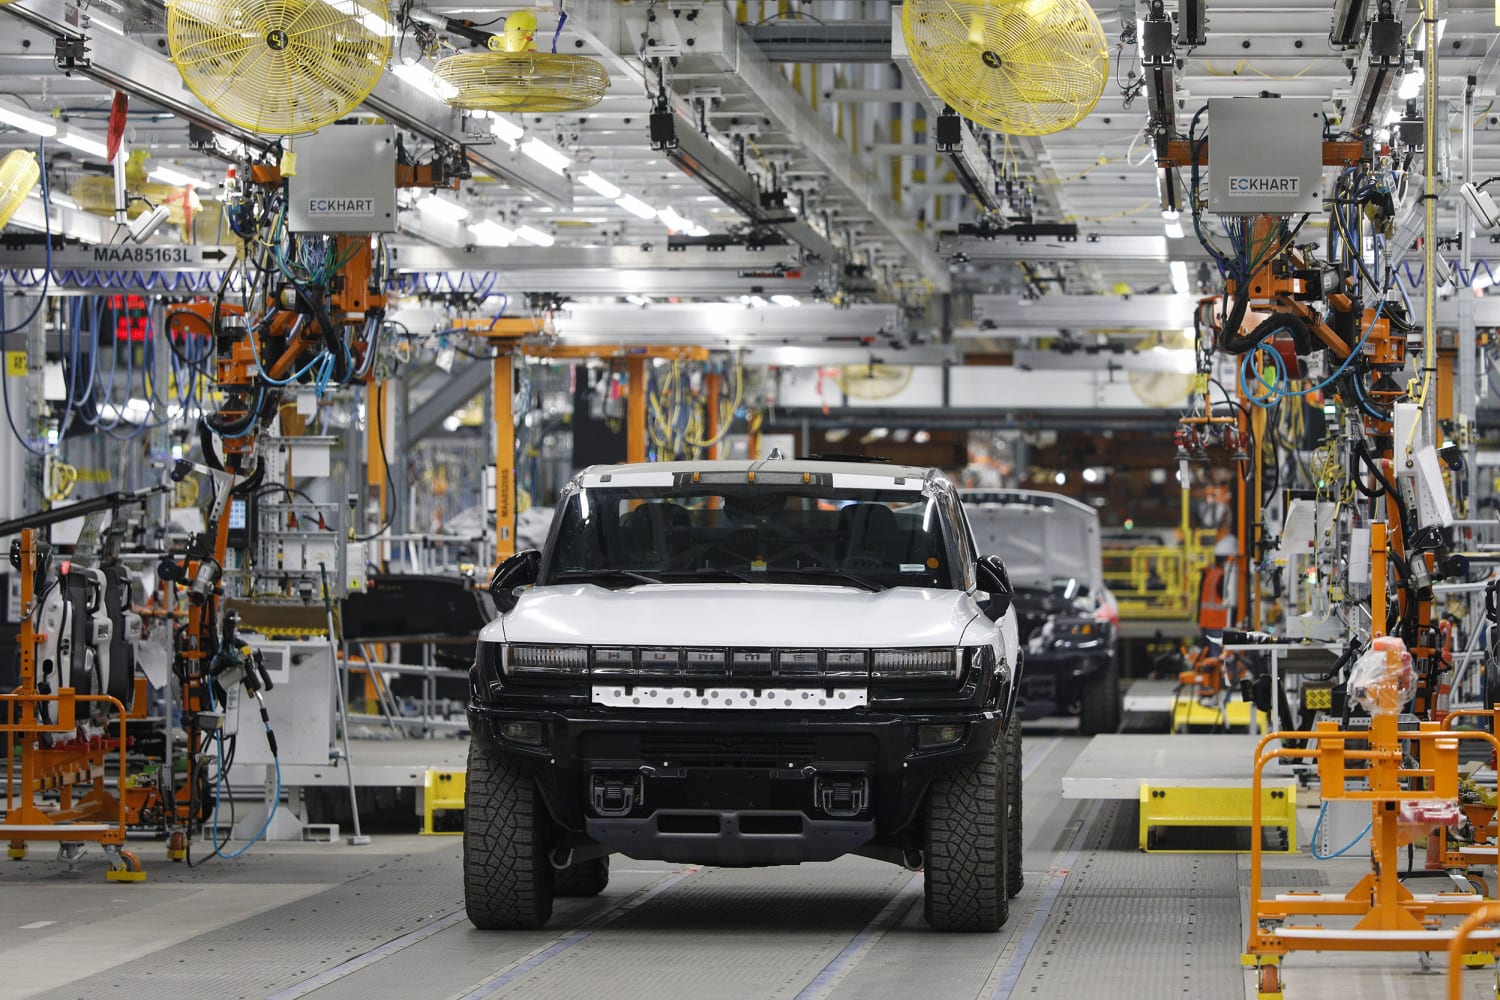 After a year of shortages and shutdowns, here’s what’s ahead for the auto industry in 2022